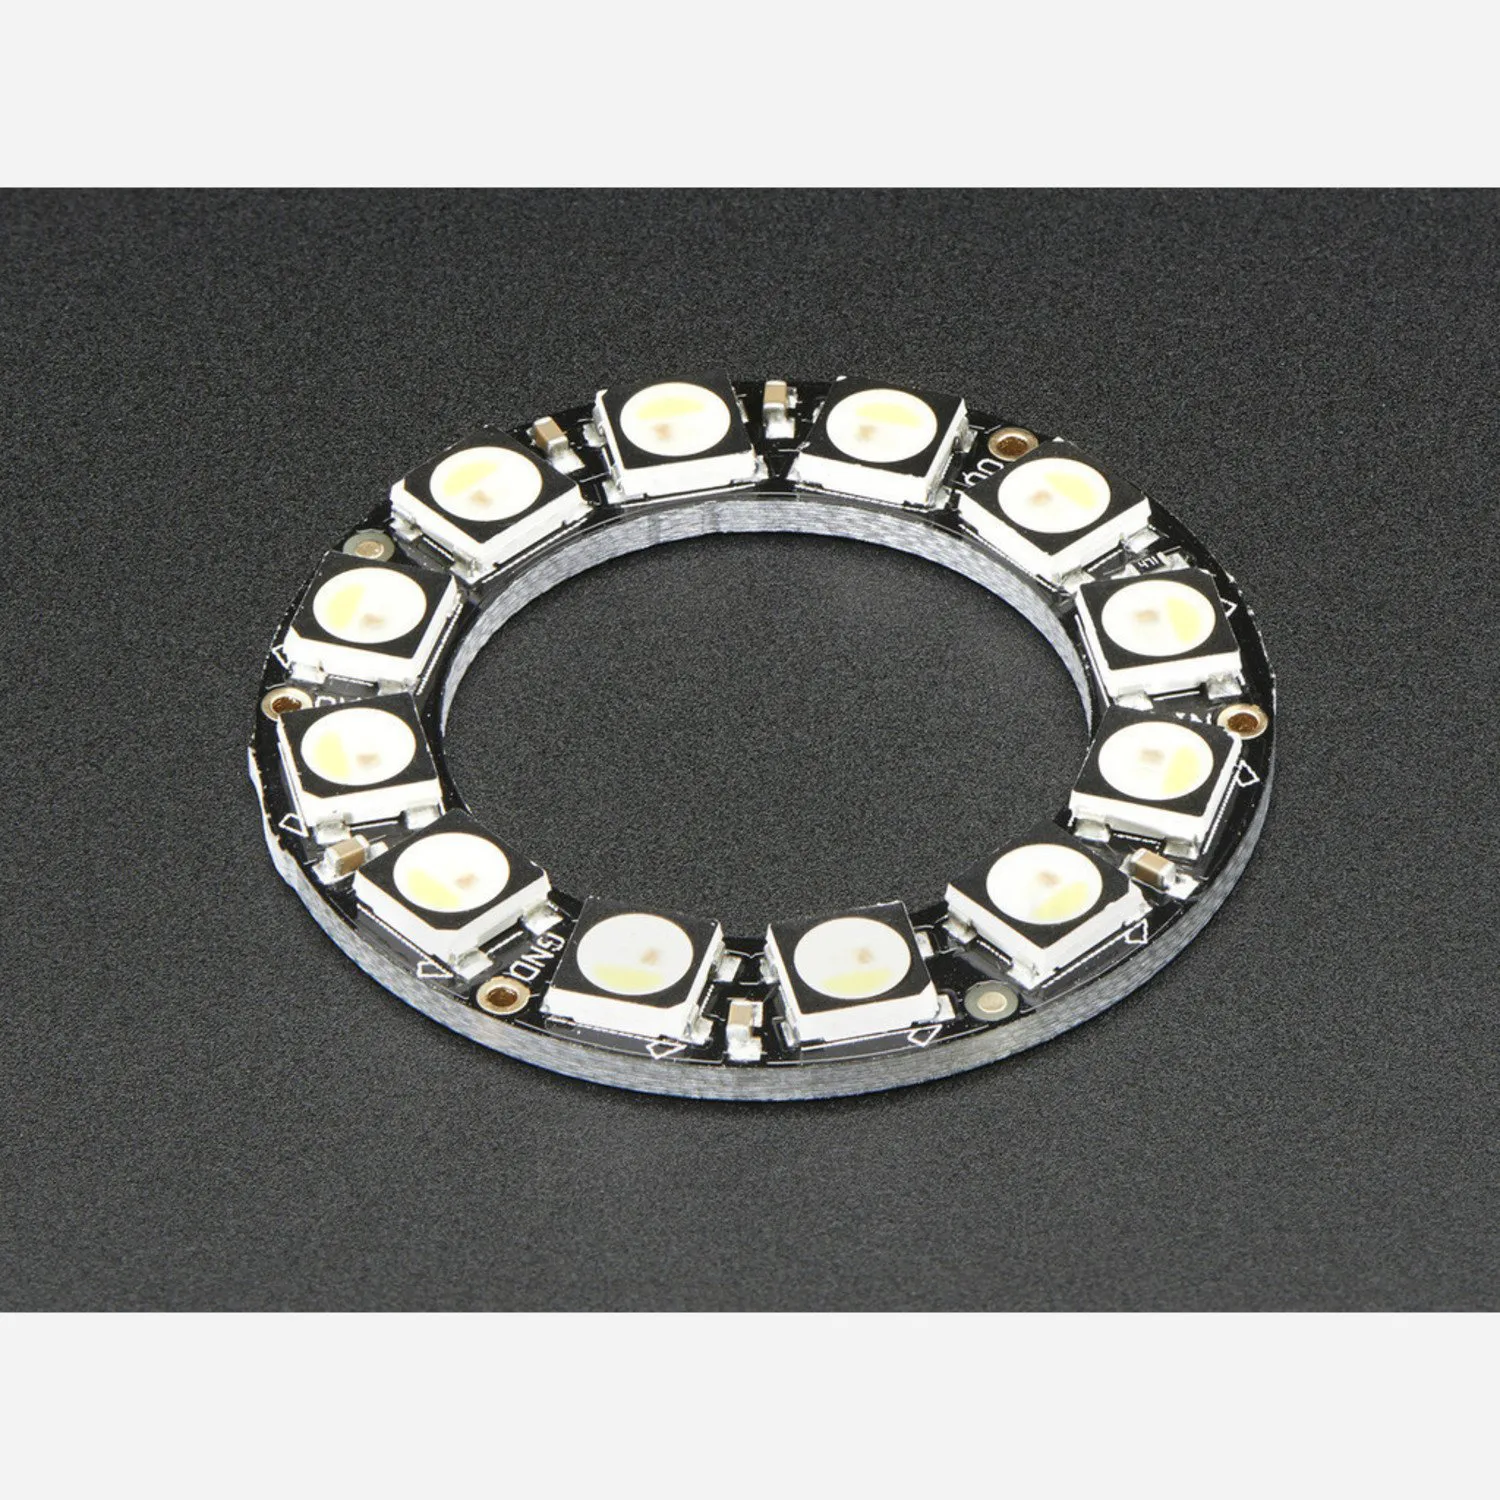 Photo of NeoPixel Ring - 12 x 5050 RGBW LEDs w/ Integrated Drivers - Natural White - ~4500K